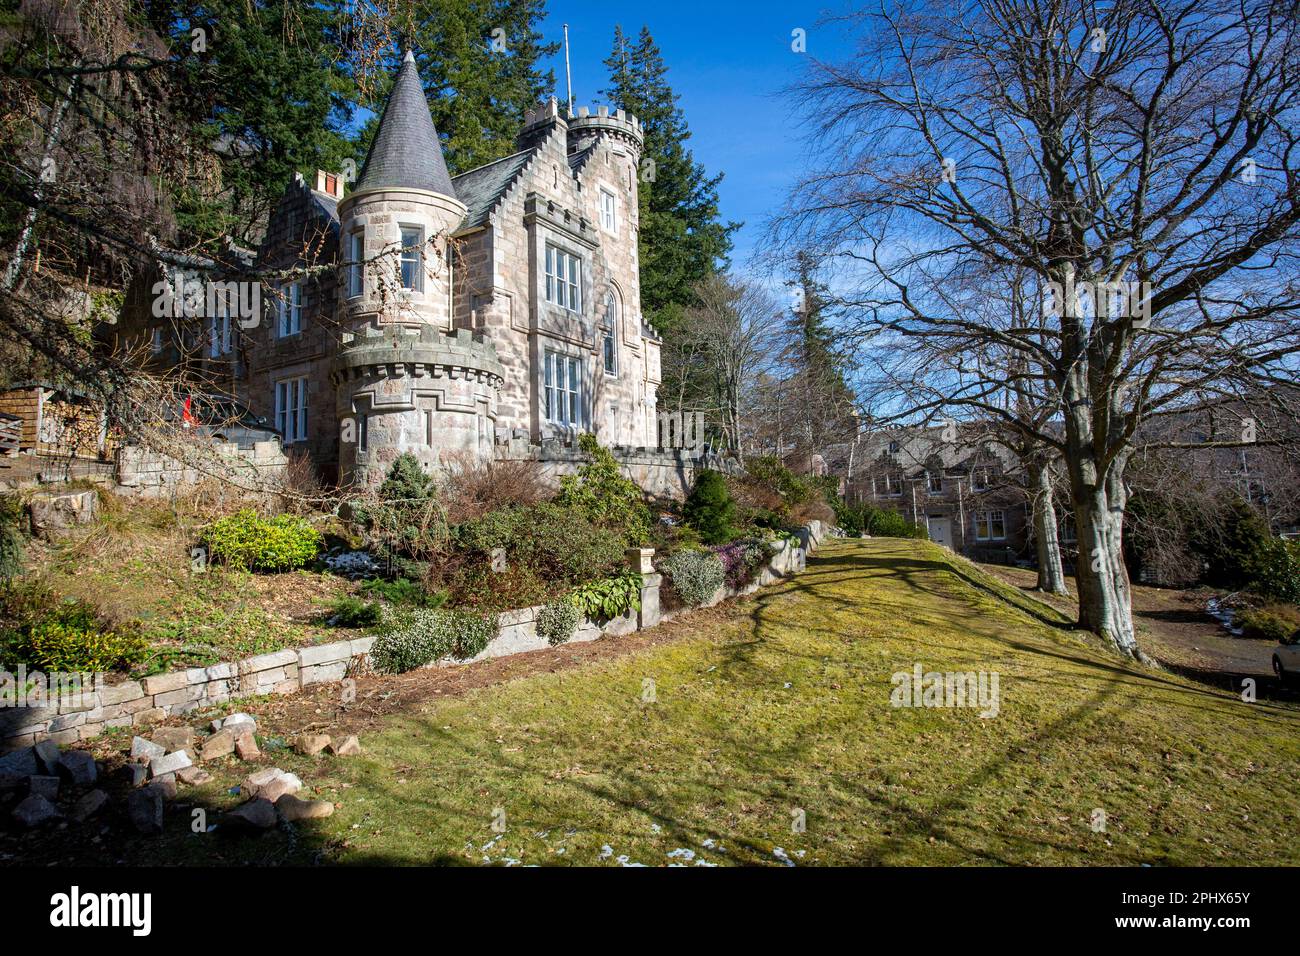 The houses in the village of Ballater look like fairytale ,Royal Deeside, Scotland. Stock Photo